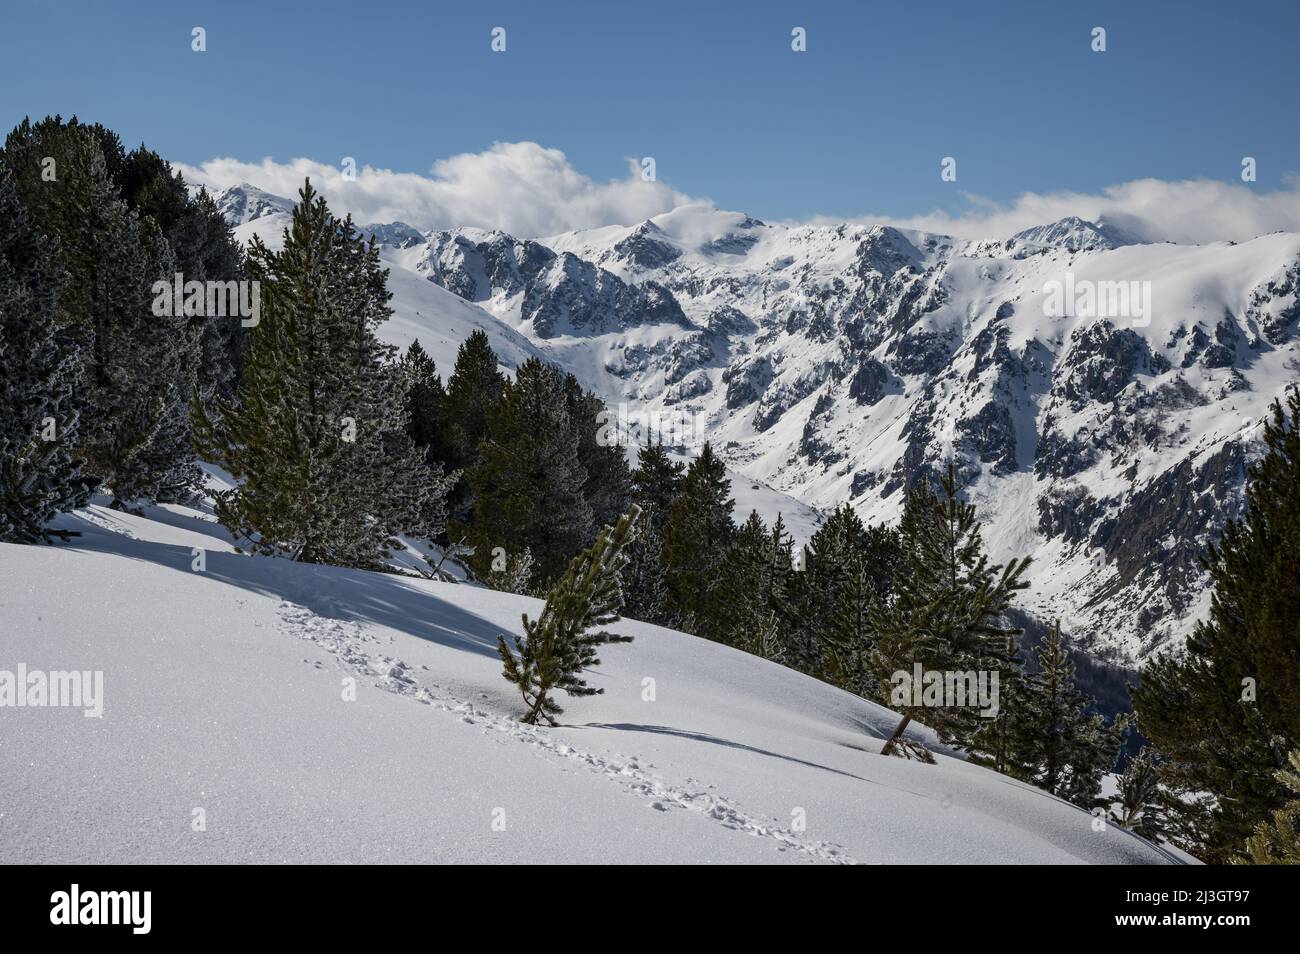 France, Ariege, Pyrenees massif; Les Cabannes, snowshoeing on the Beille plateau, a panoramic belvedere on the border peaks Stock Photo